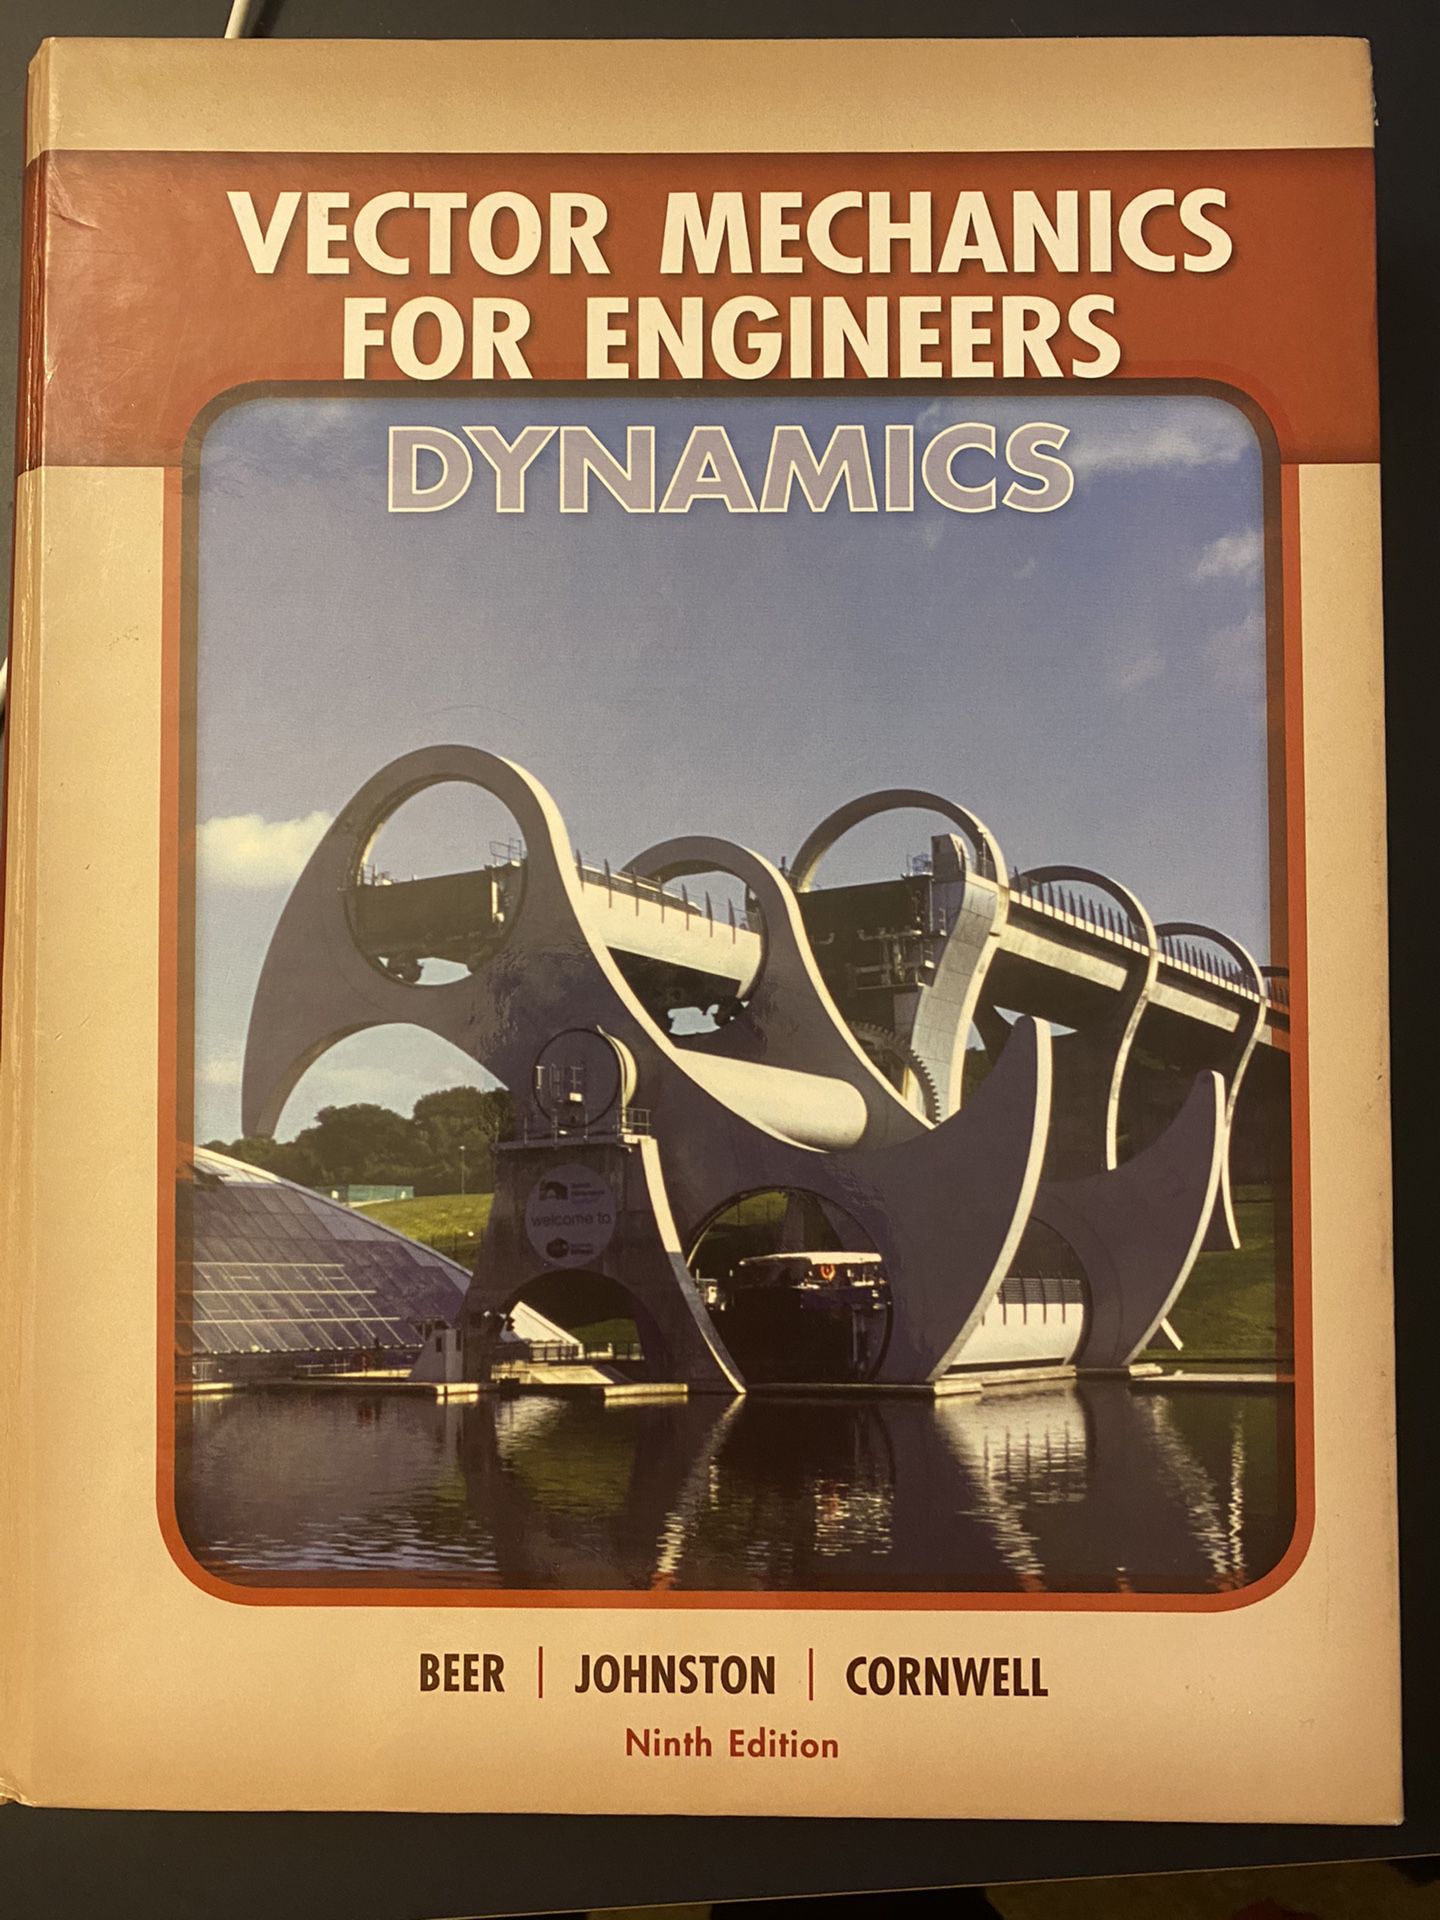 Dynamics, textbook for engineering